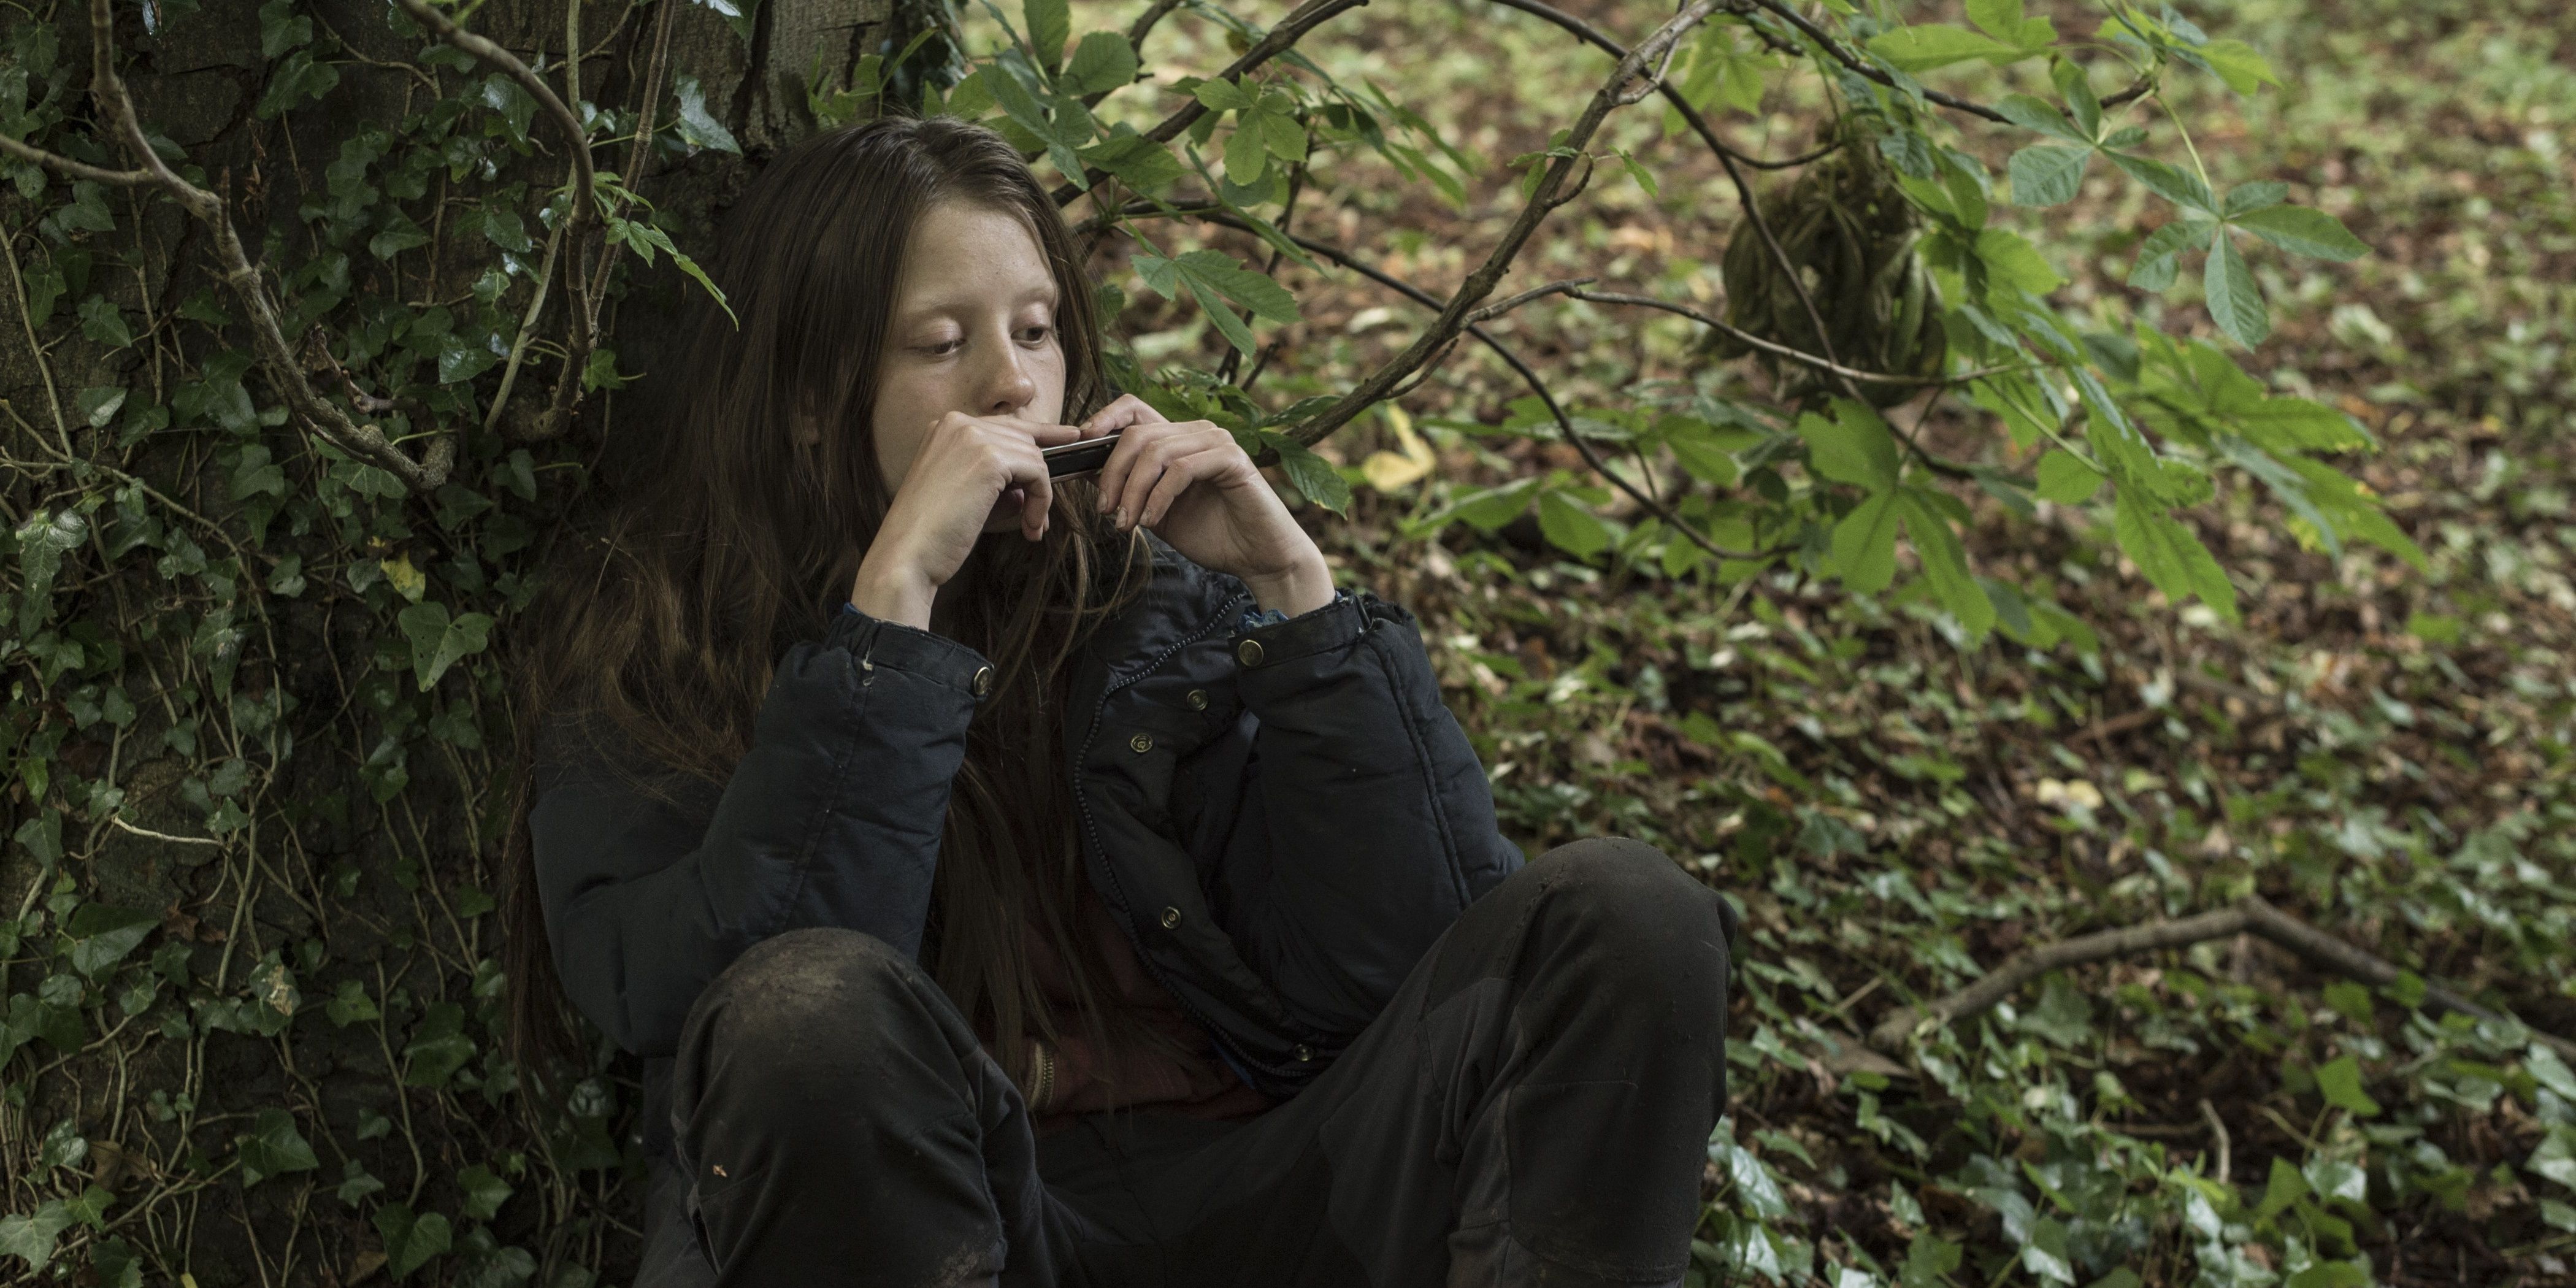 Mia Goth playing the harmonica in The Survivalist Cropped